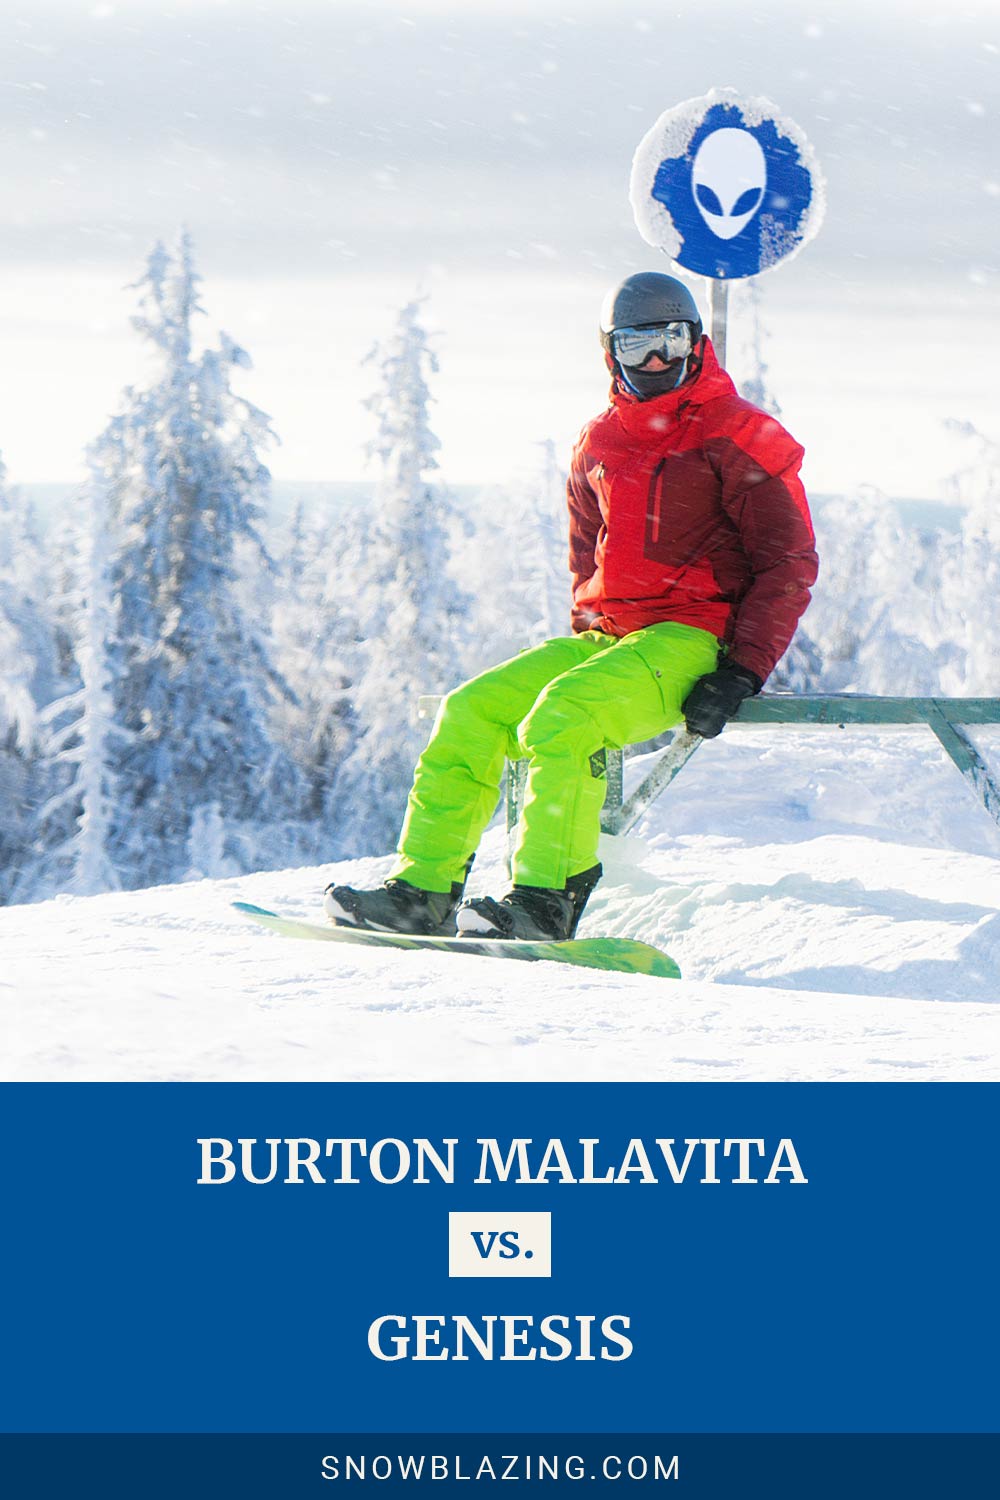 Man sitting in front of a sign with a snowboard - Burton Malavita vs. Genesis.